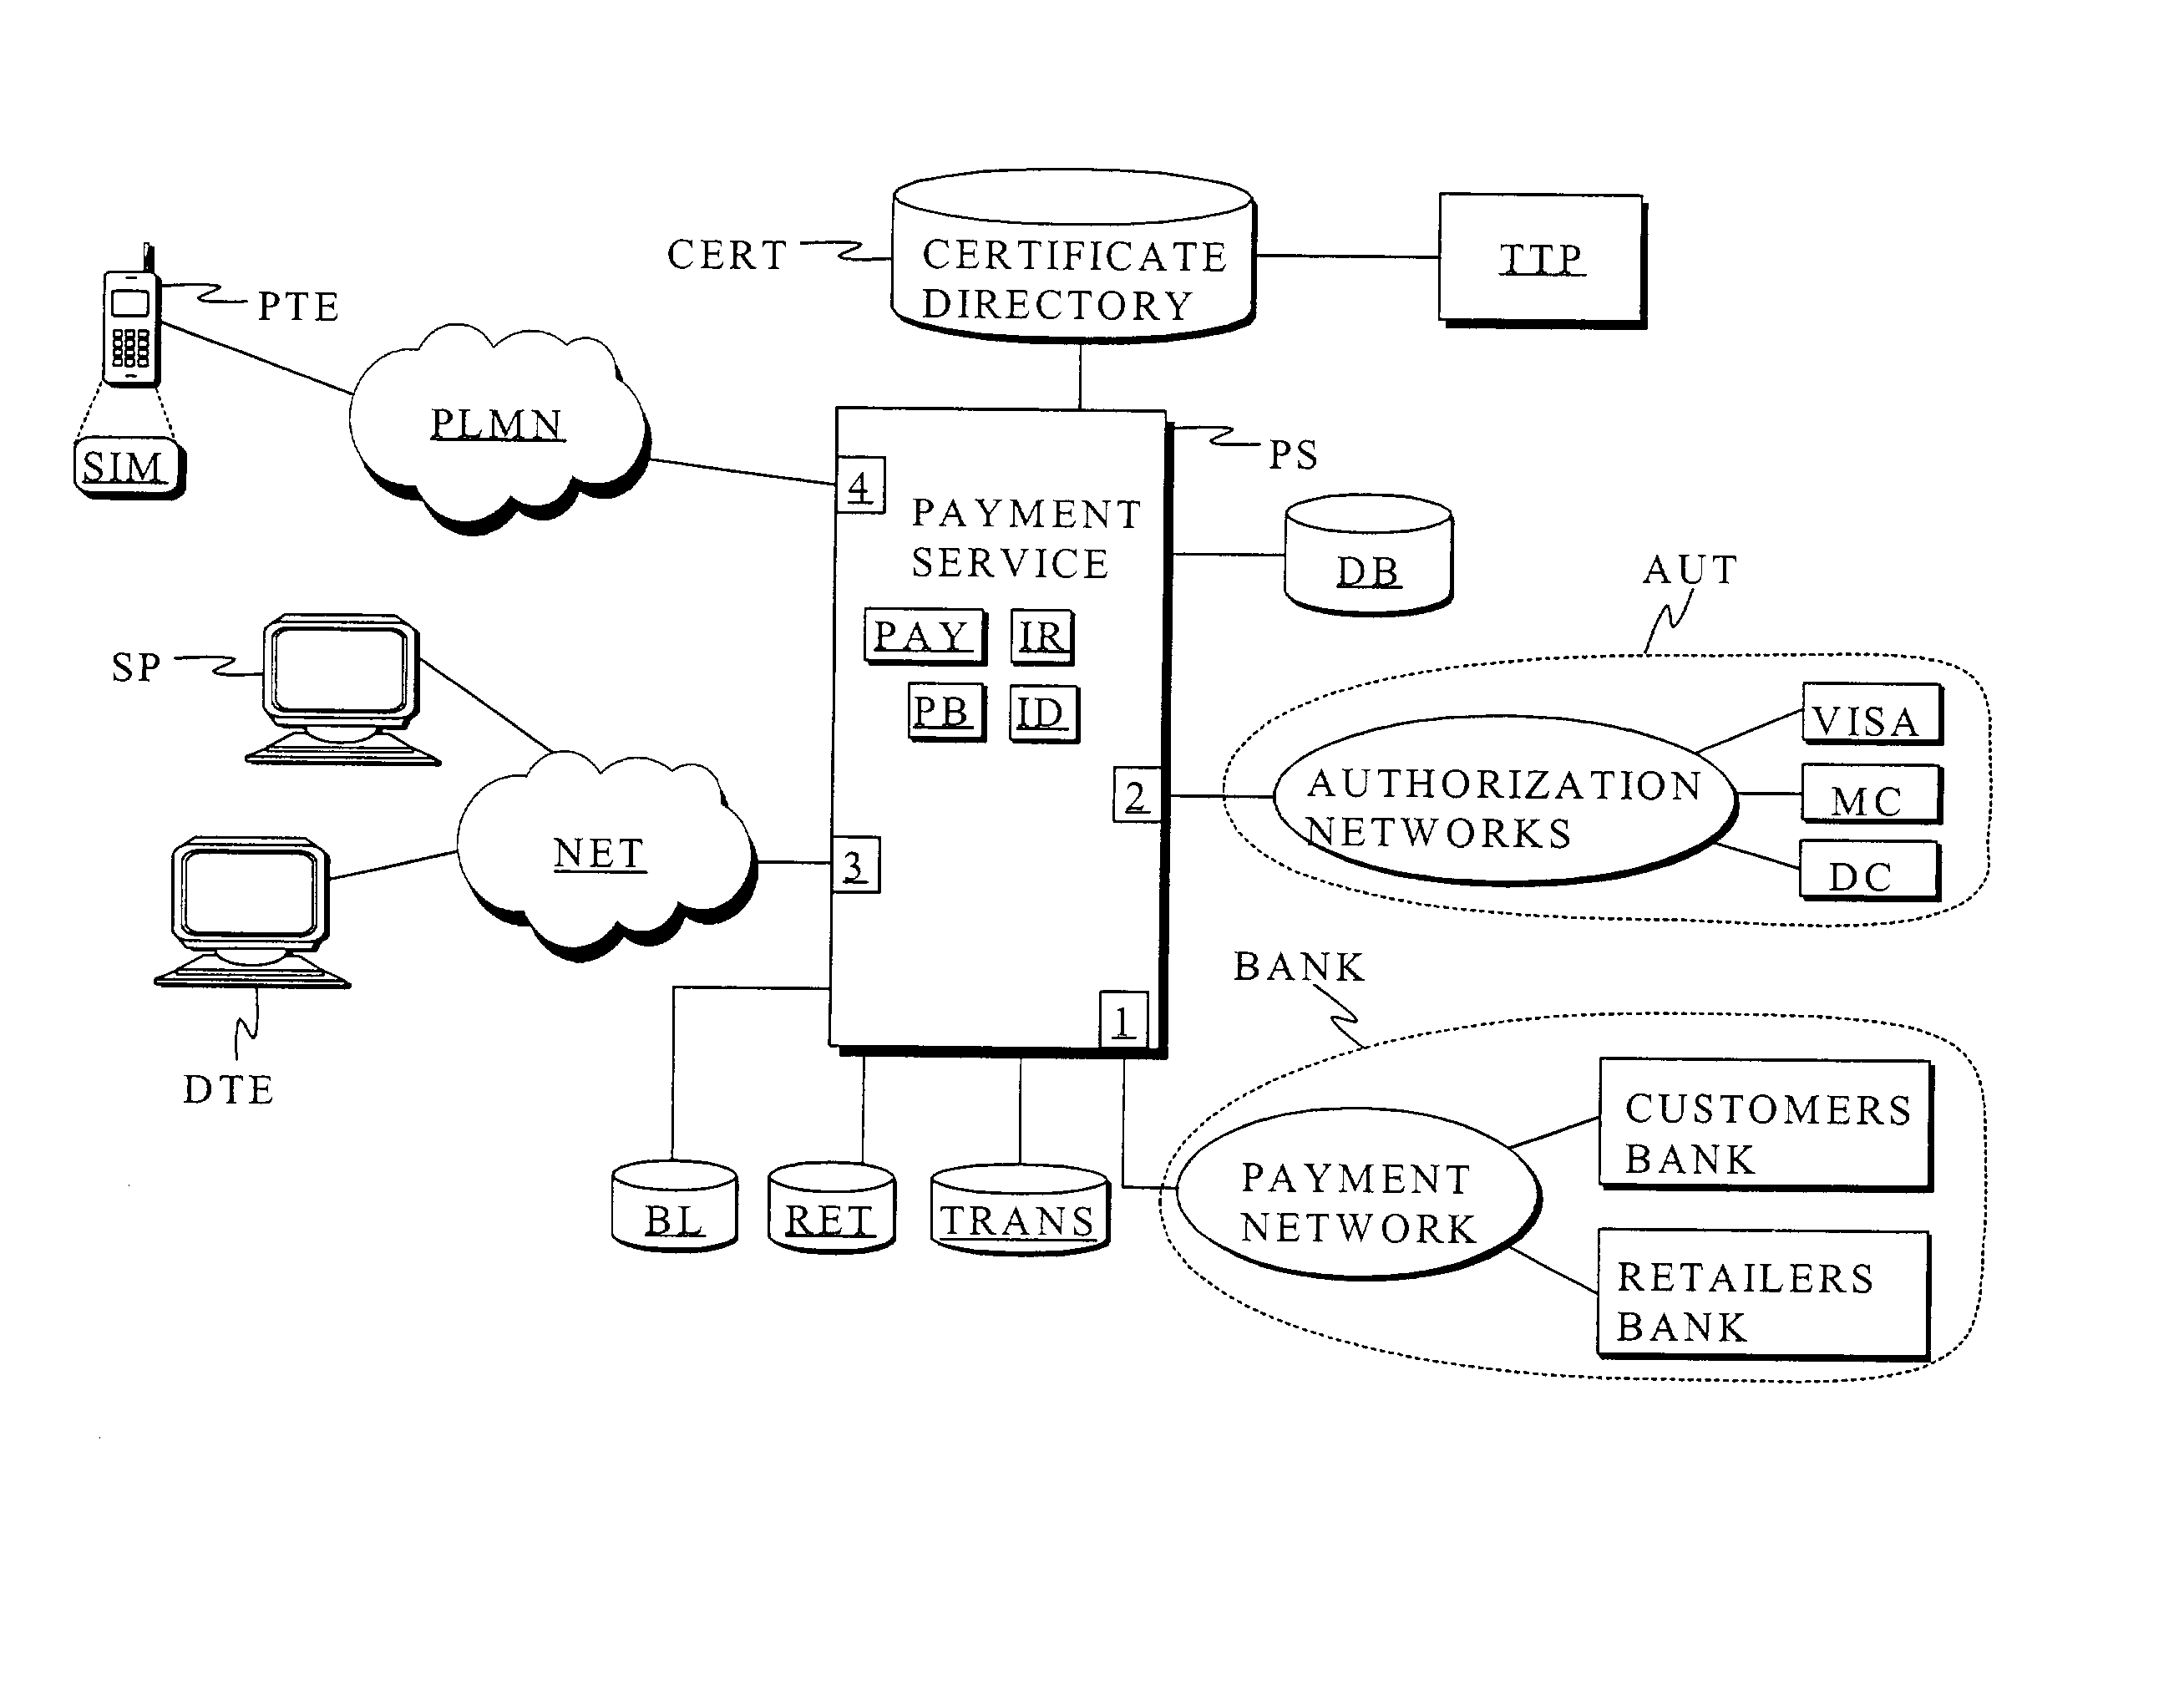 System and method for effecting secure online payment using a client payment card